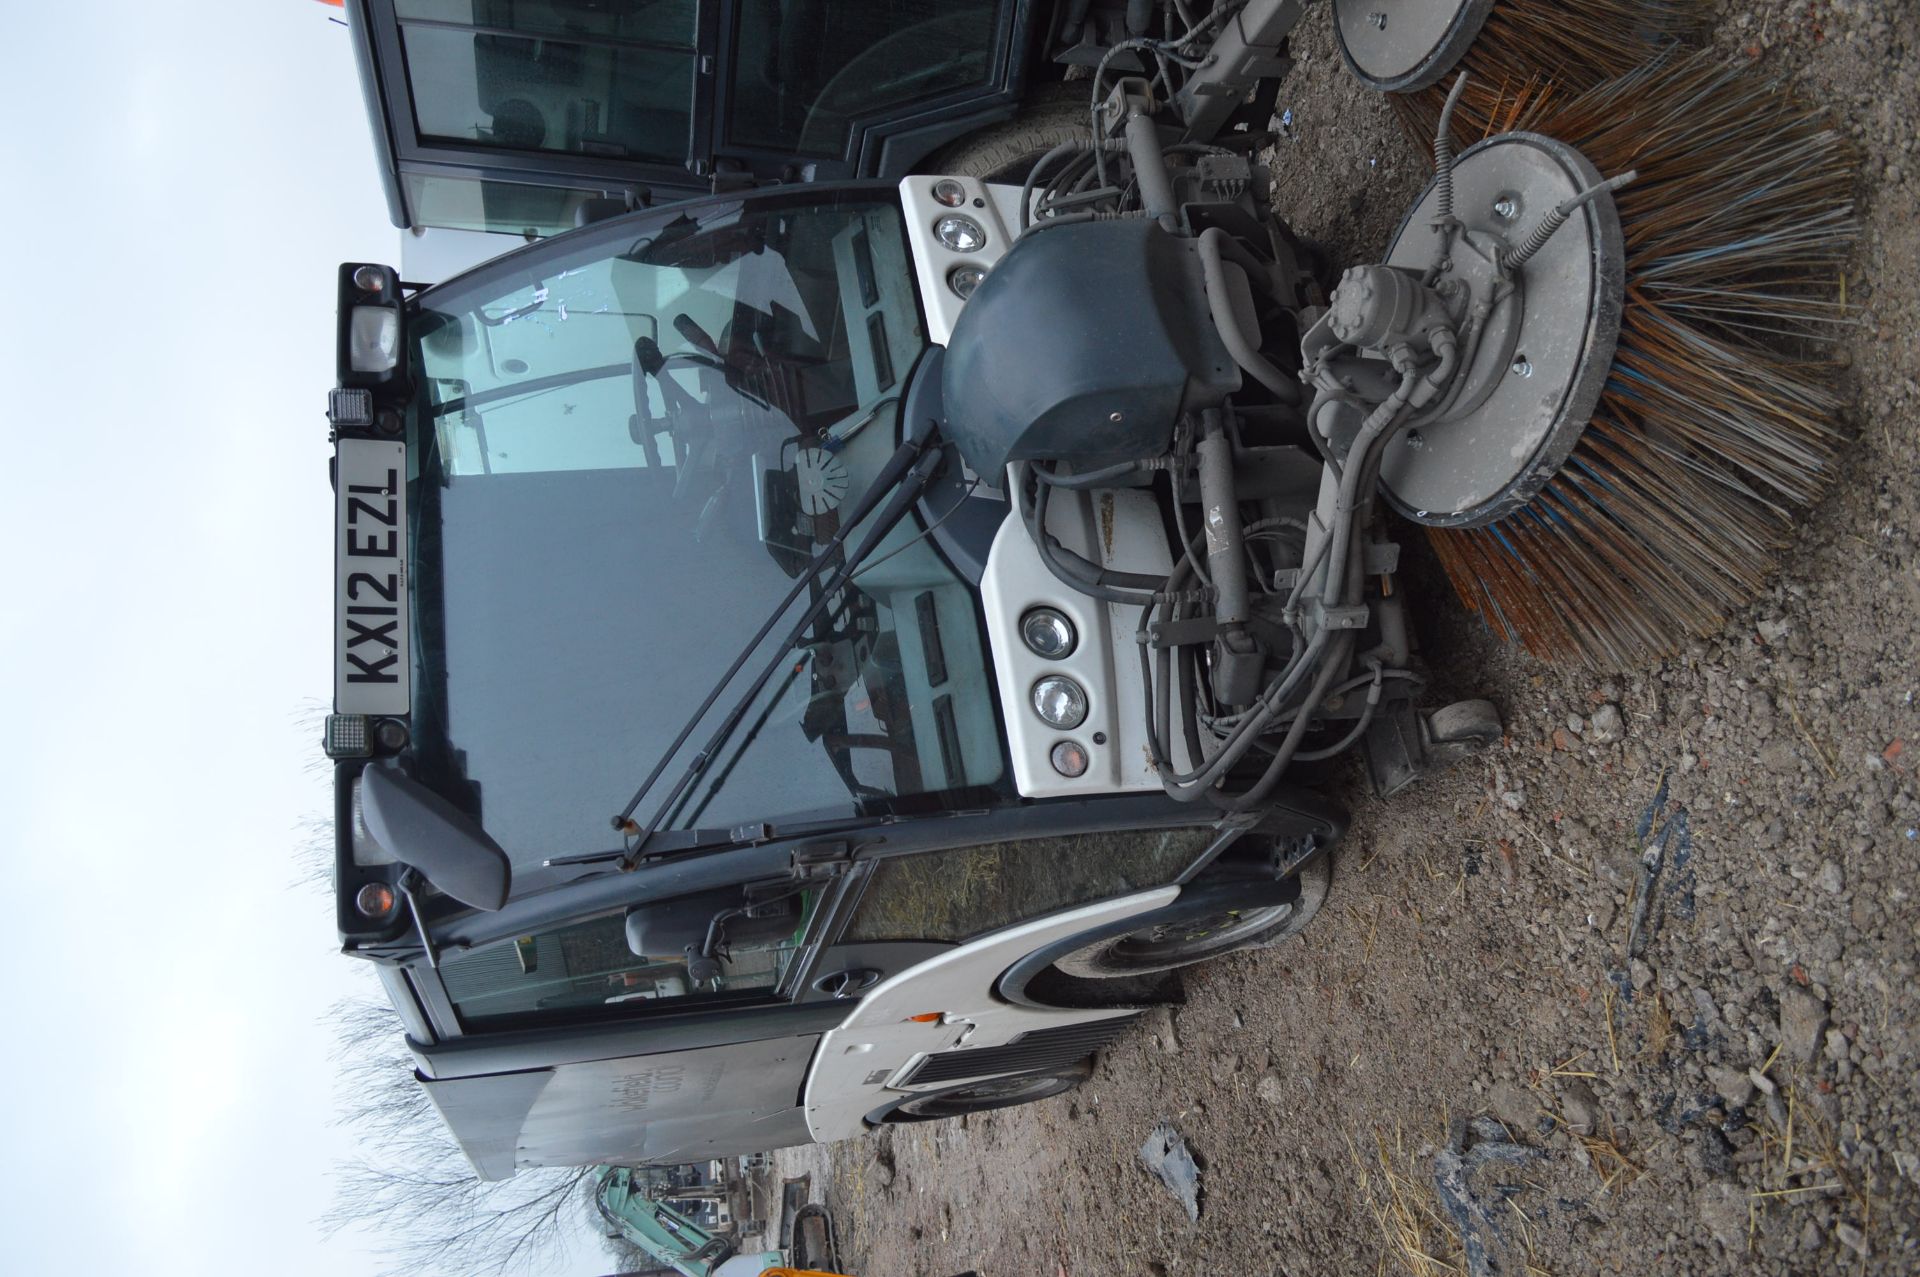 2012/12 REG HAKO CITYMASTER 2000 ROAD SWEEPER WITH TOW BAR *PLUS VAT* - Image 2 of 13